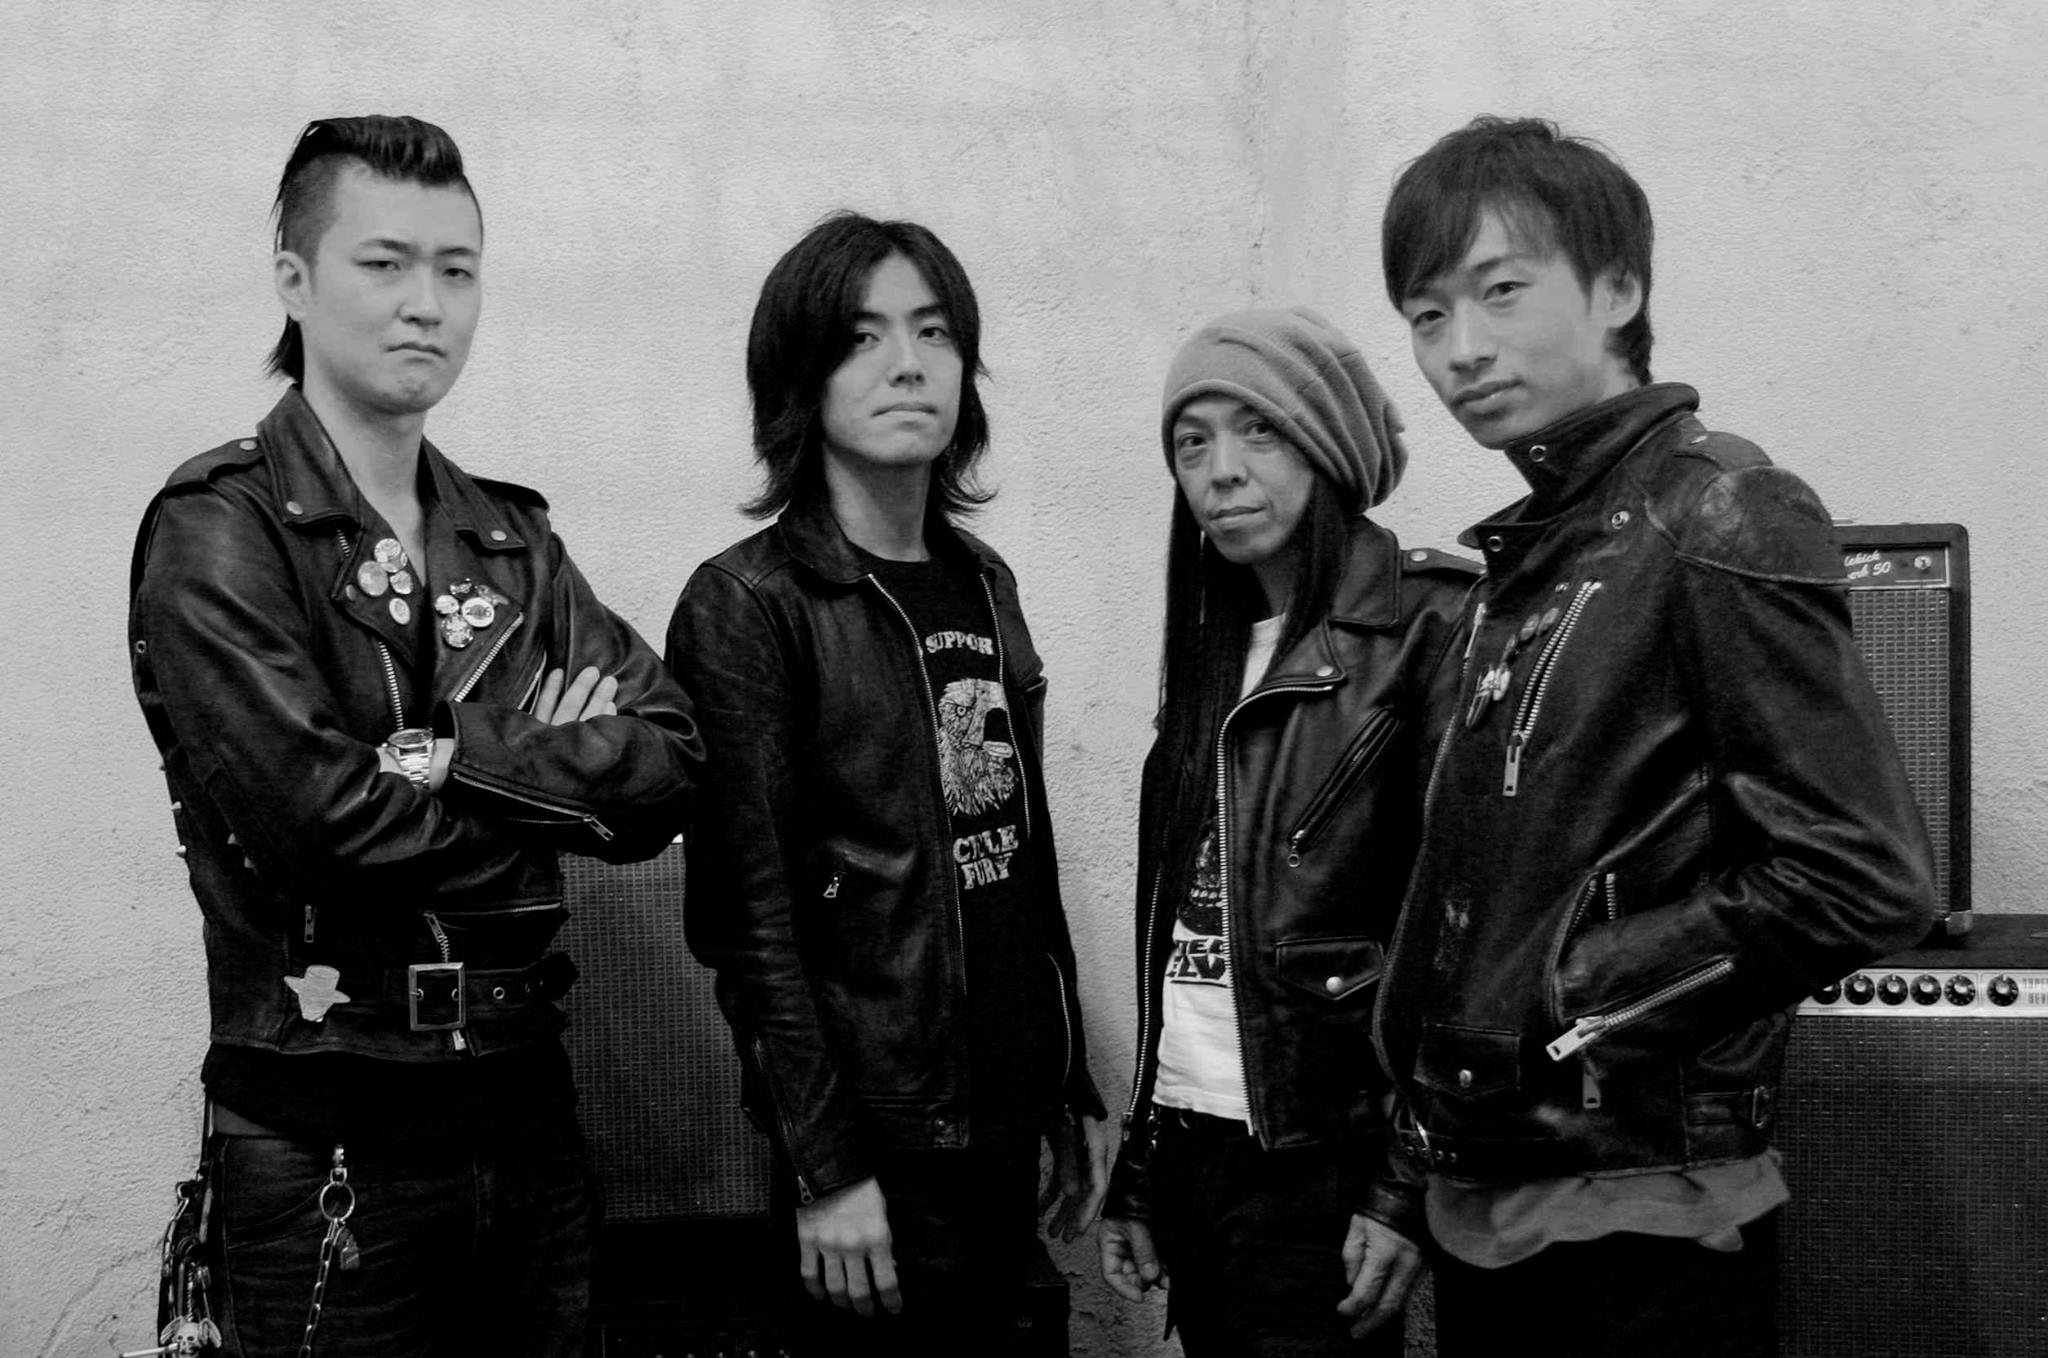 Japanese rock band The Dead Vikings have released a new music video